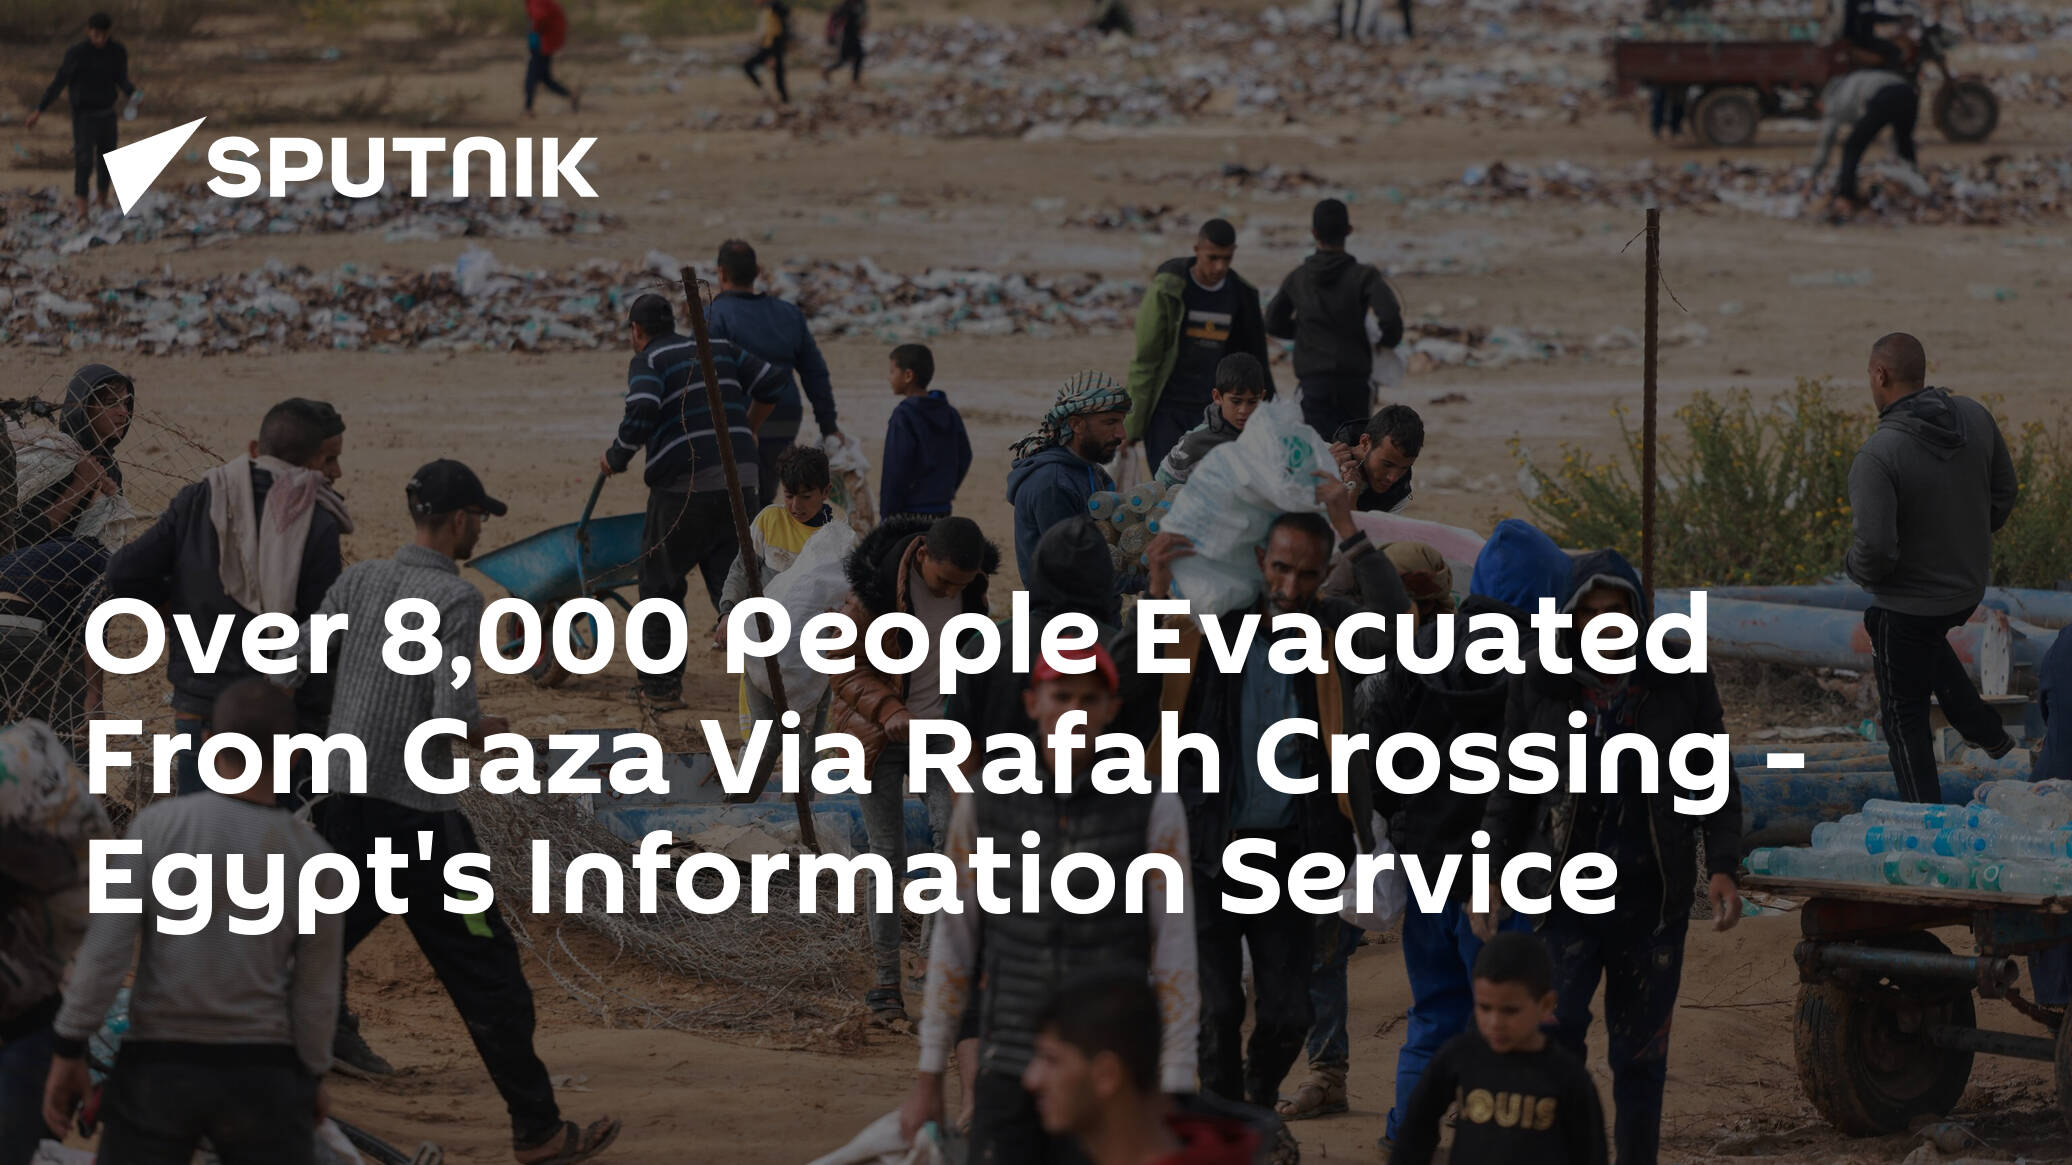 Over 8,000 People Evacuated From Gaza Via Rafah Crossing – Egypt's Information Service